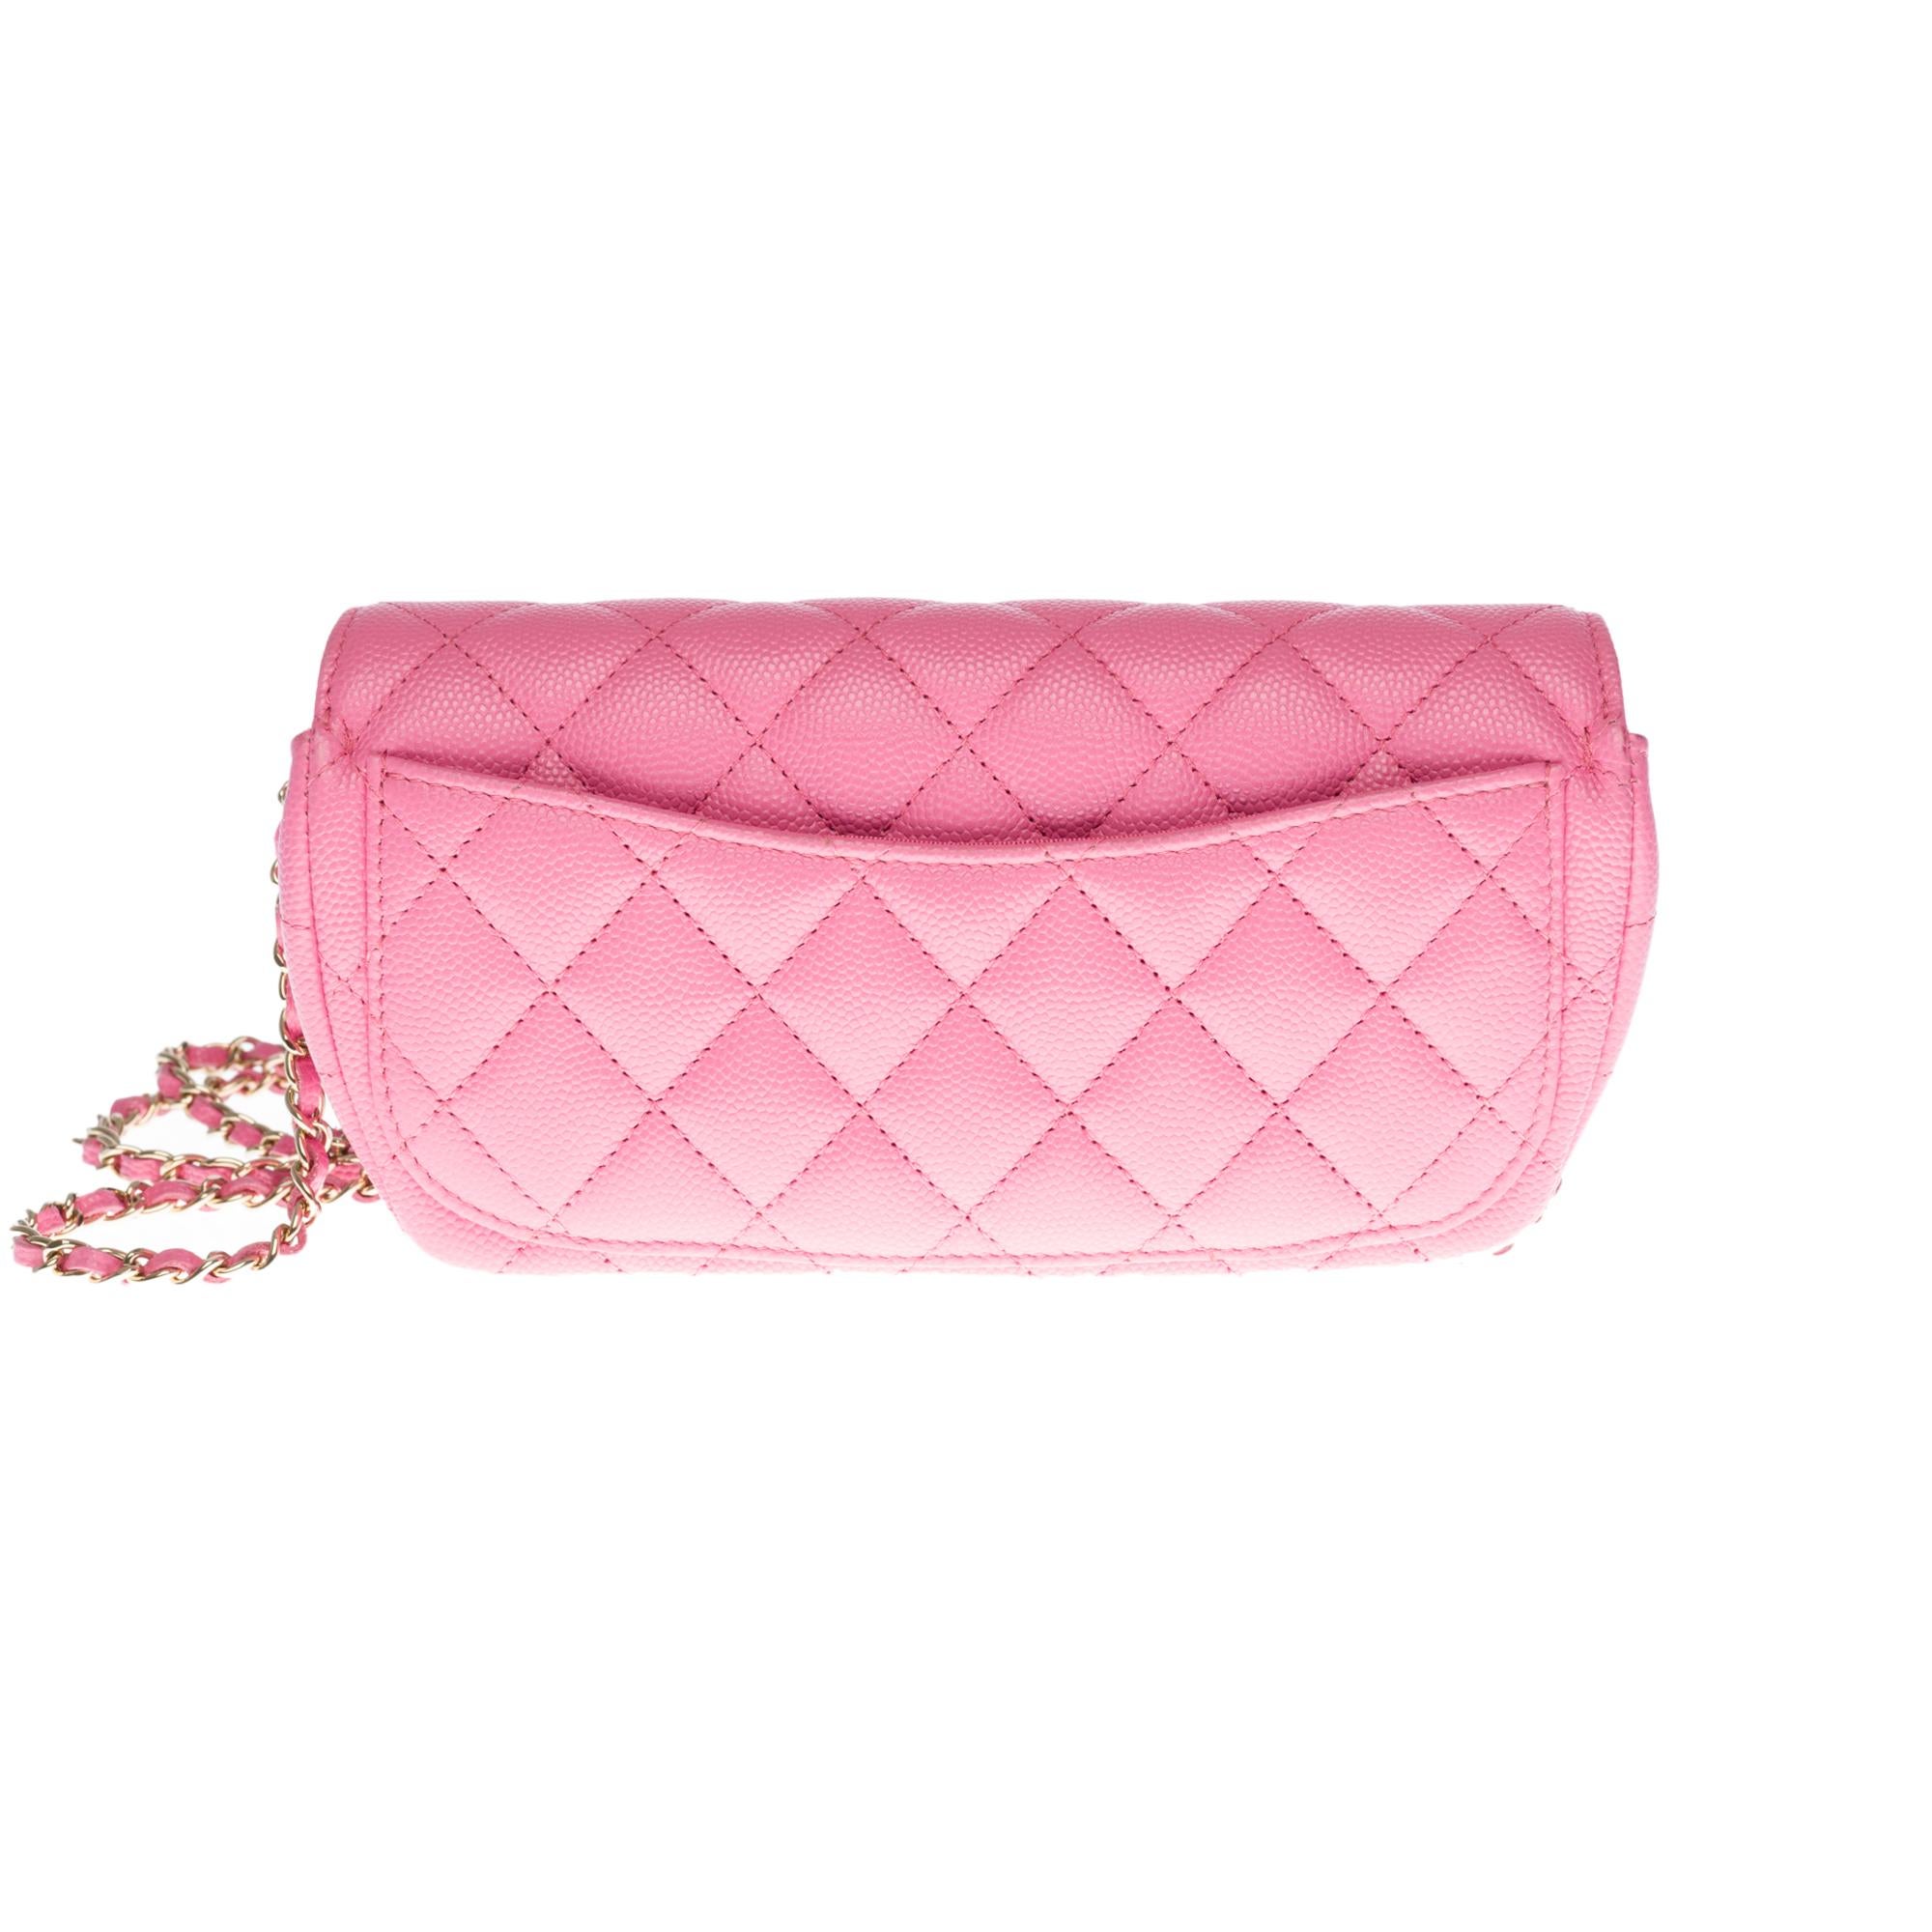 Lovely Chanel Classique Sunglasses Bag/Case in pink caviar quilted leather, champagne metal hardware
Flap closure with champagne metal clasp
Interior in pink canvas
Signature: 